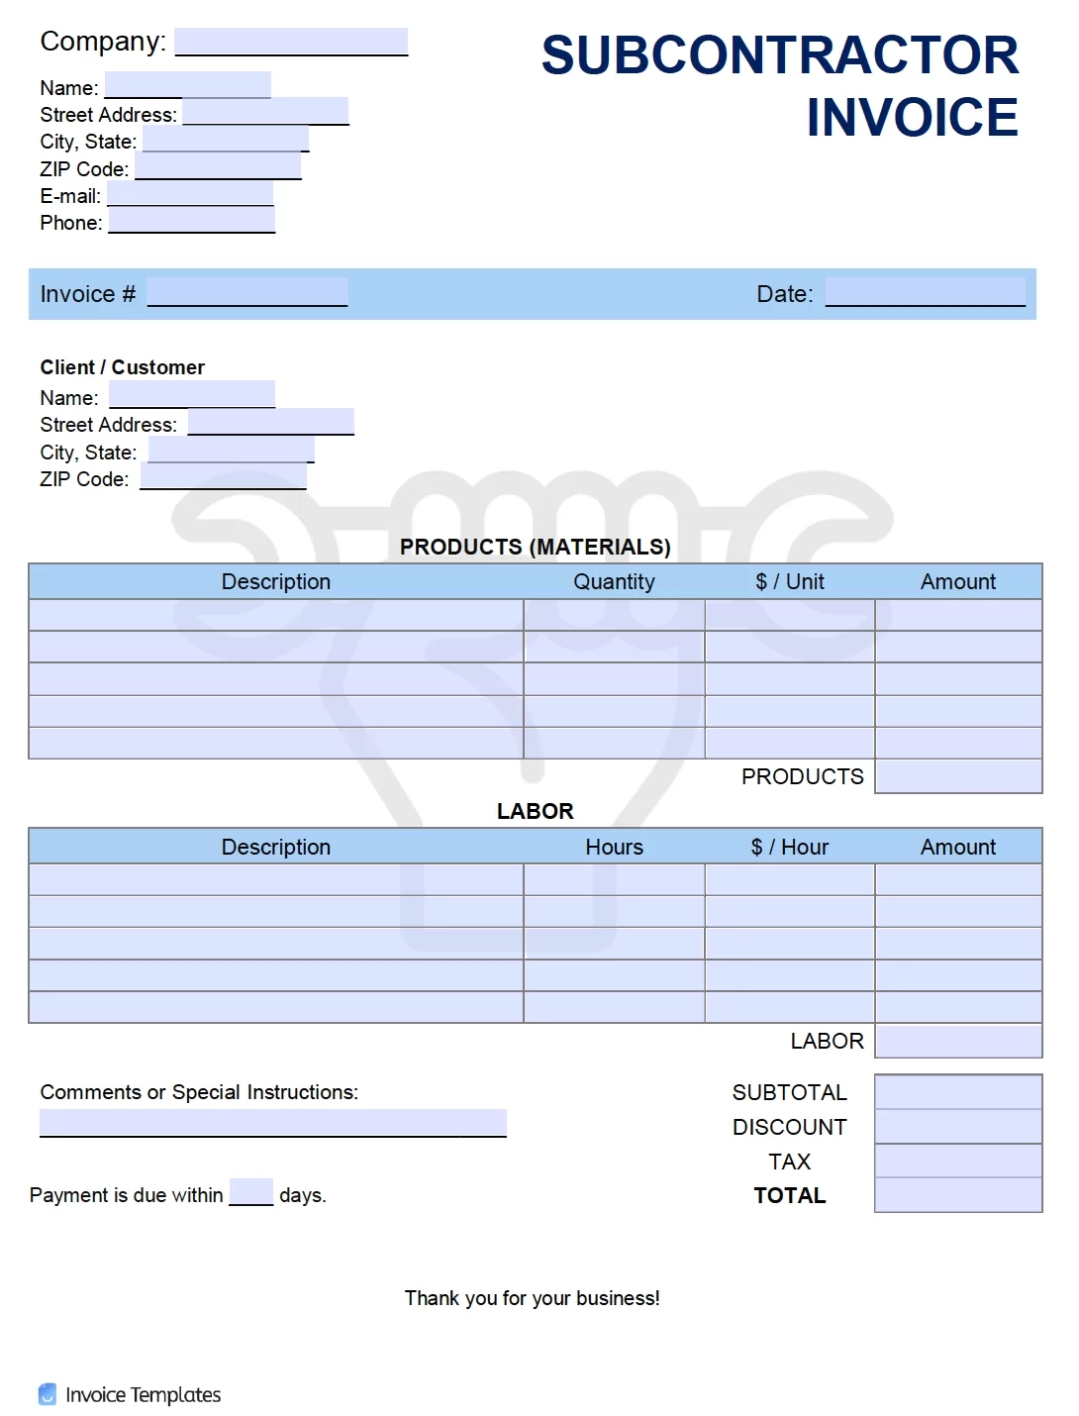 Subcontractor Invoice With Regard To Invoice Record Keeping Template